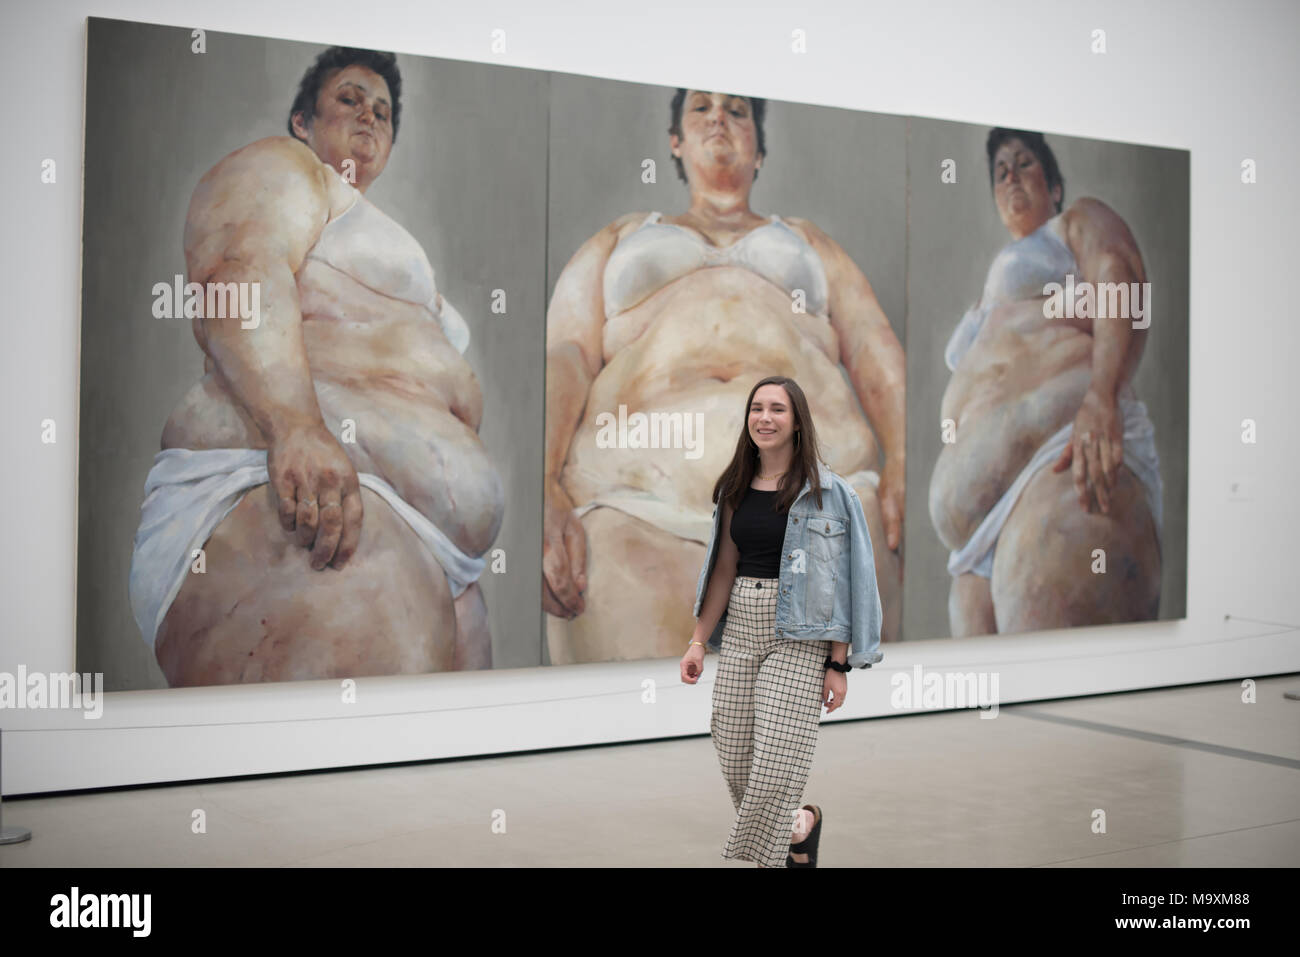 LOS ANGELES, CA - March 15, 2018: 'Strategy' by Jenny Saville in The Broad Museum in Downtown of Los Angeles on March 15, 2018. Stock Photo